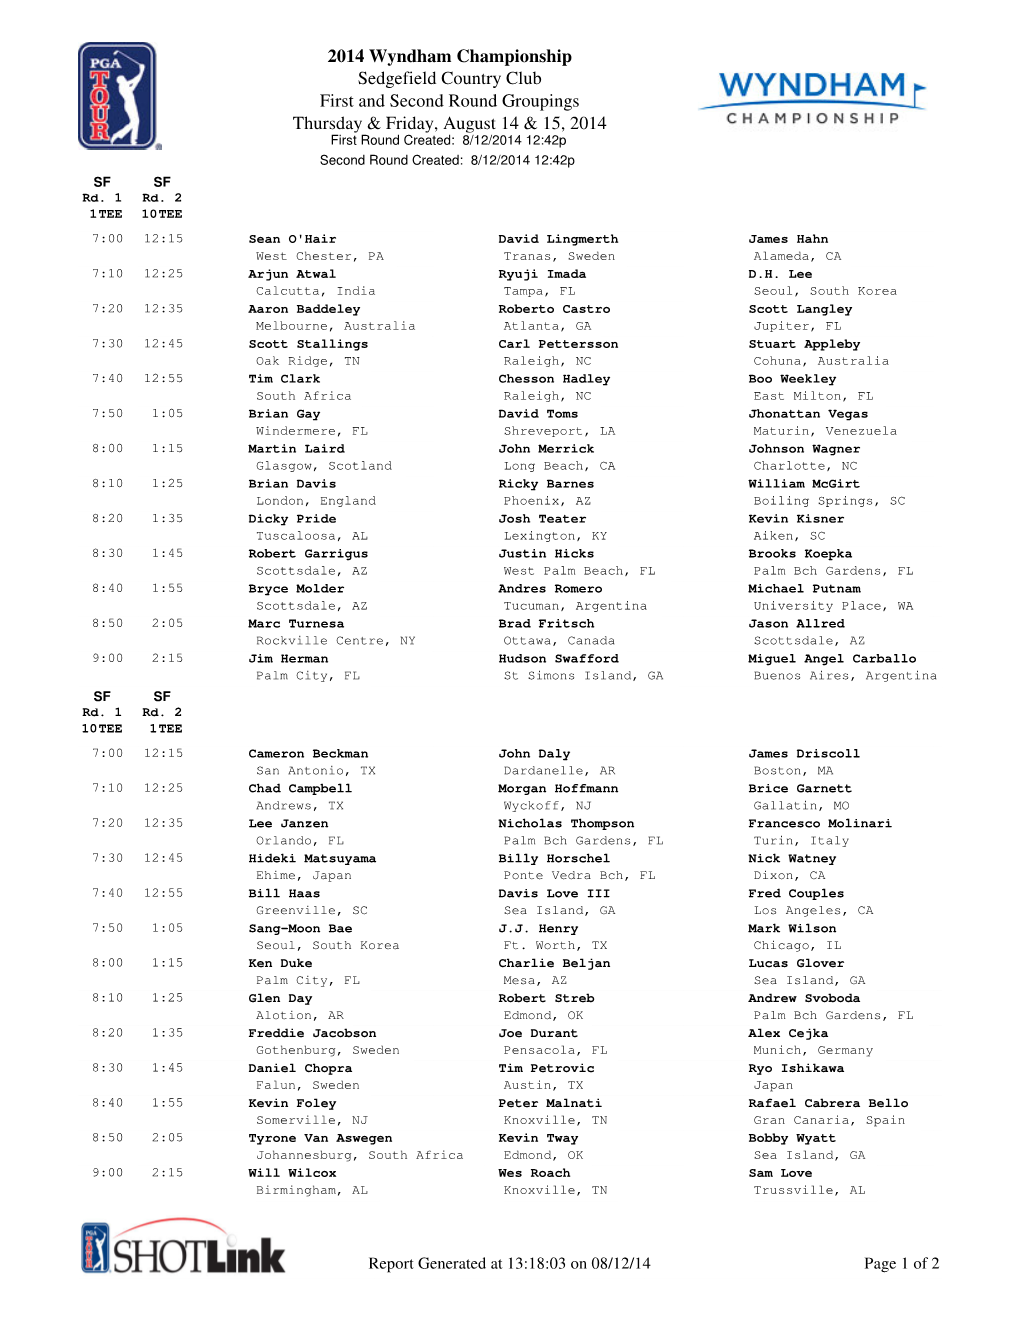 2014 First and Second Round Tee Times